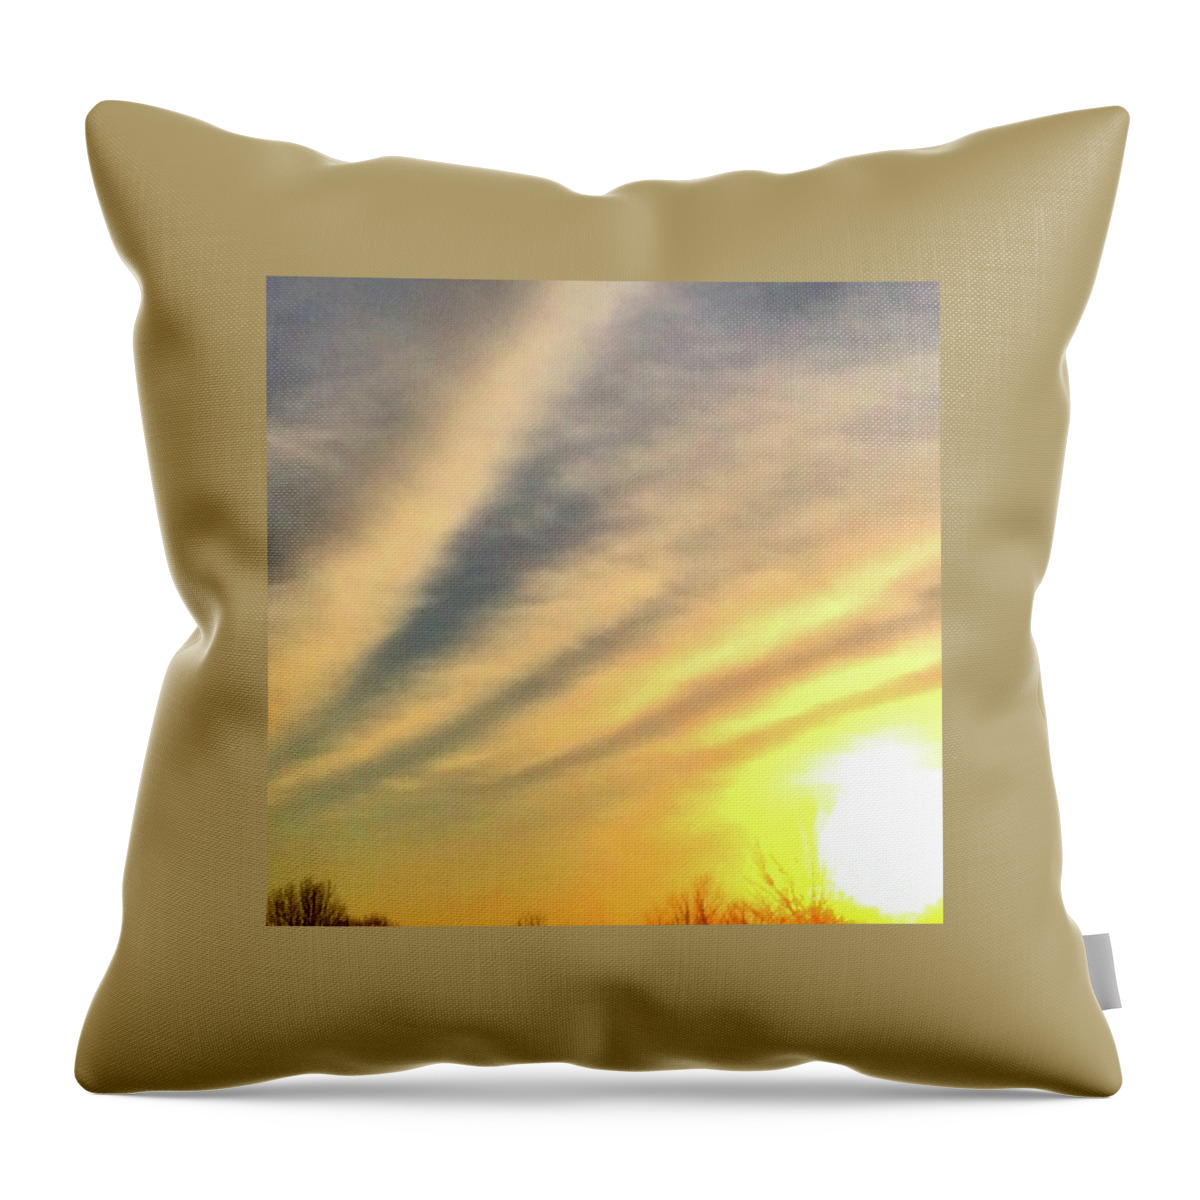 Clouds Throw Pillow featuring the photograph Clouds and Sun by Sumoflam Photography